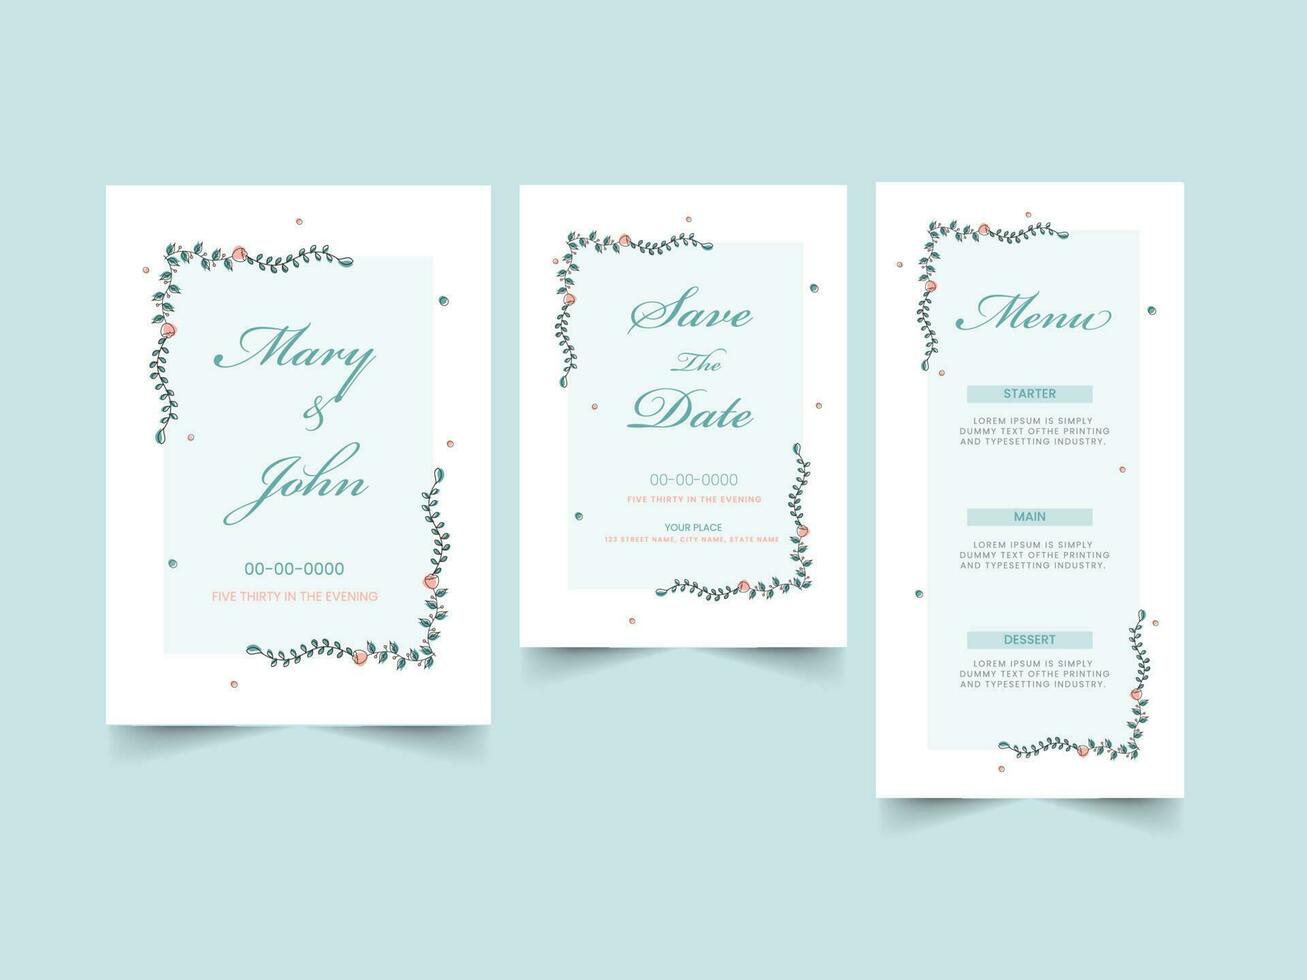 Wedding Invitation Card Like As Save The Date, Menu Template Layout On Blue Background. vector